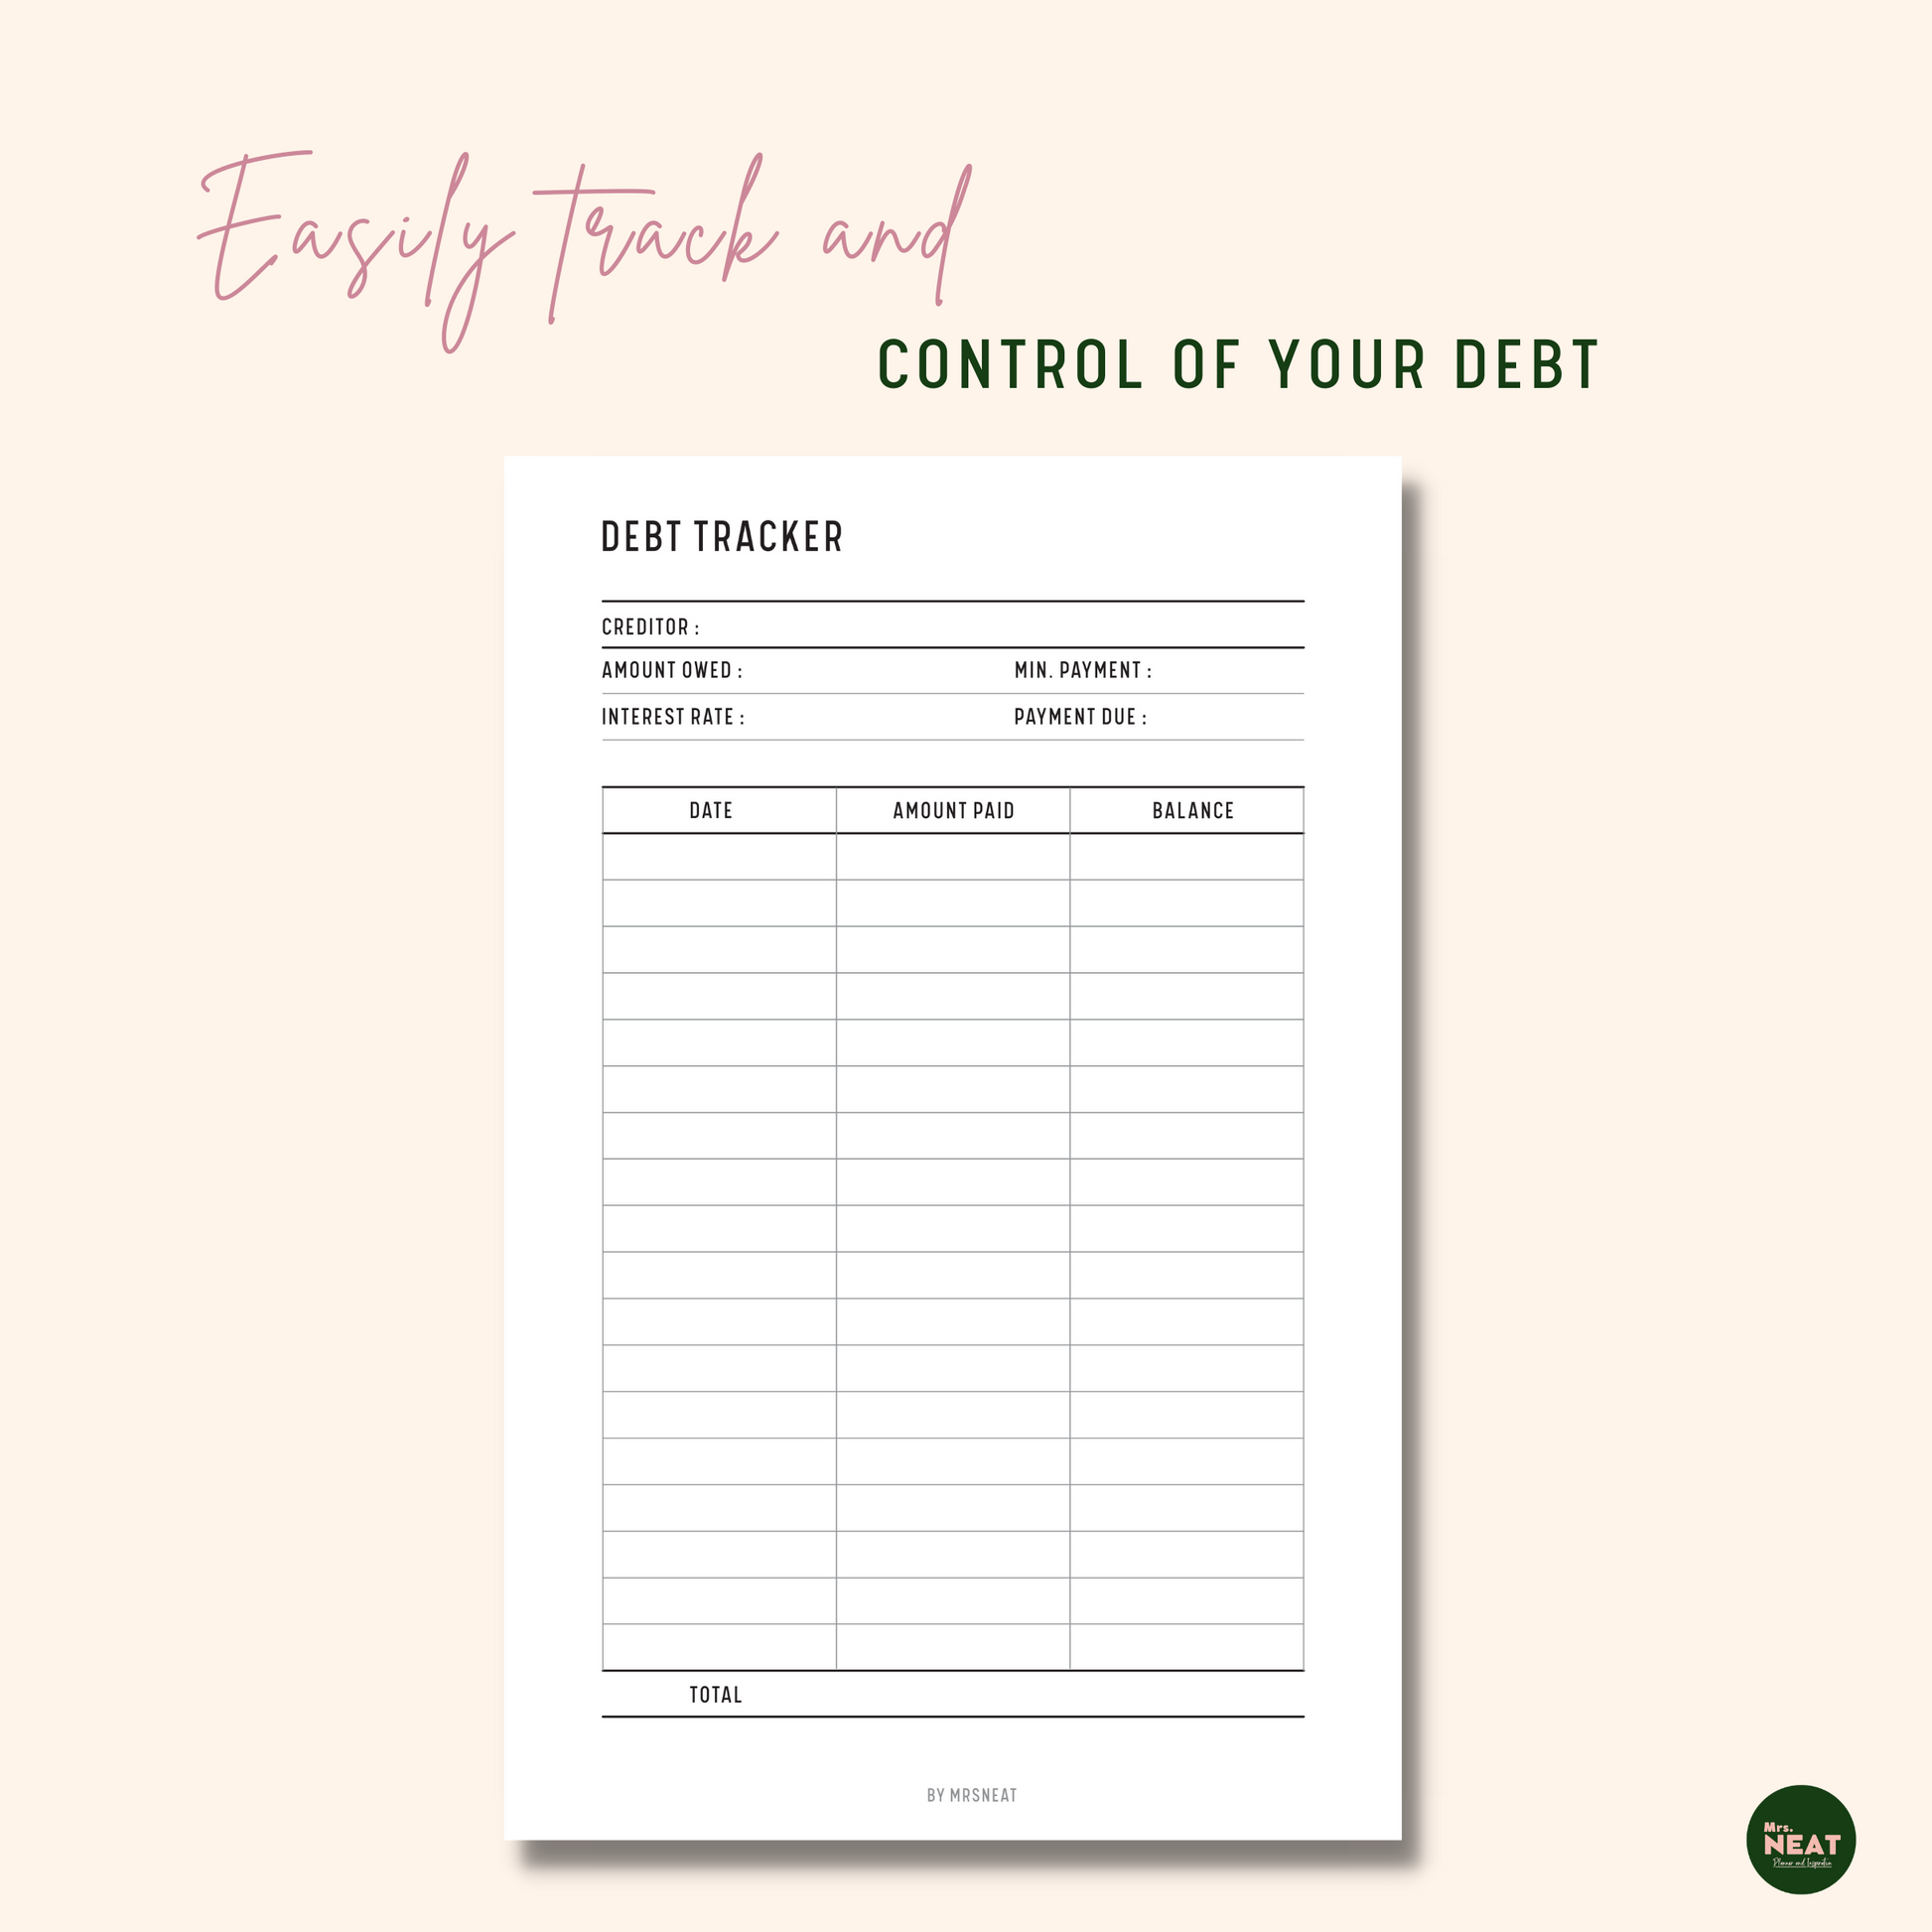 Minimalist Debt Payment Tracker to easily track and control debt